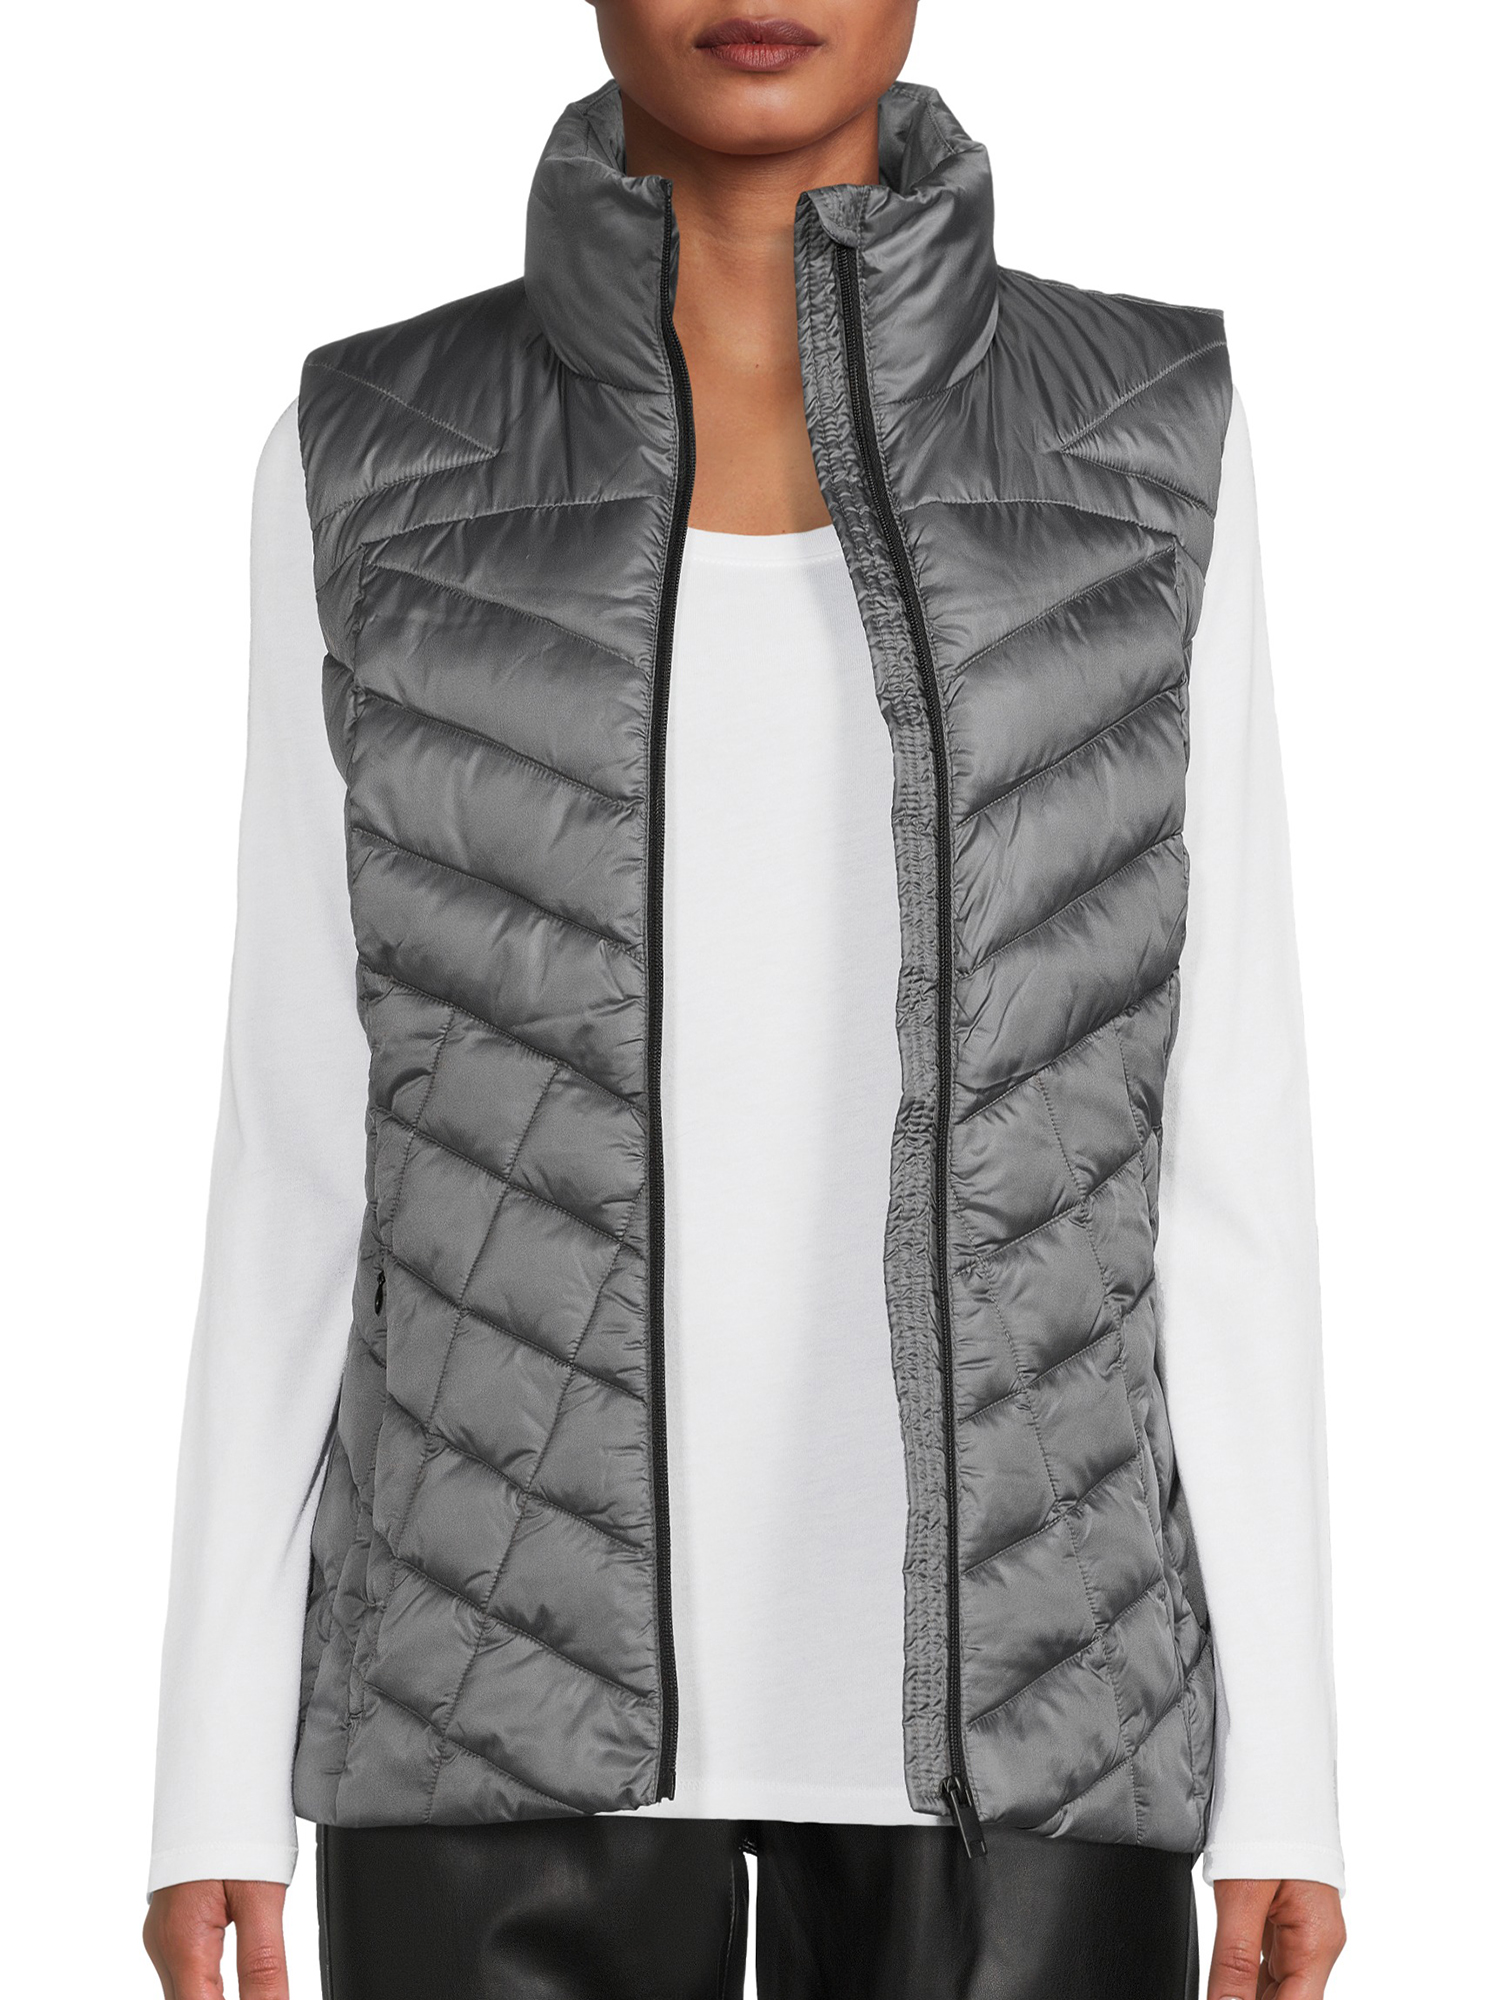 Big Chill Women's Chevron Quilted Puffer Vest - image 1 of 5